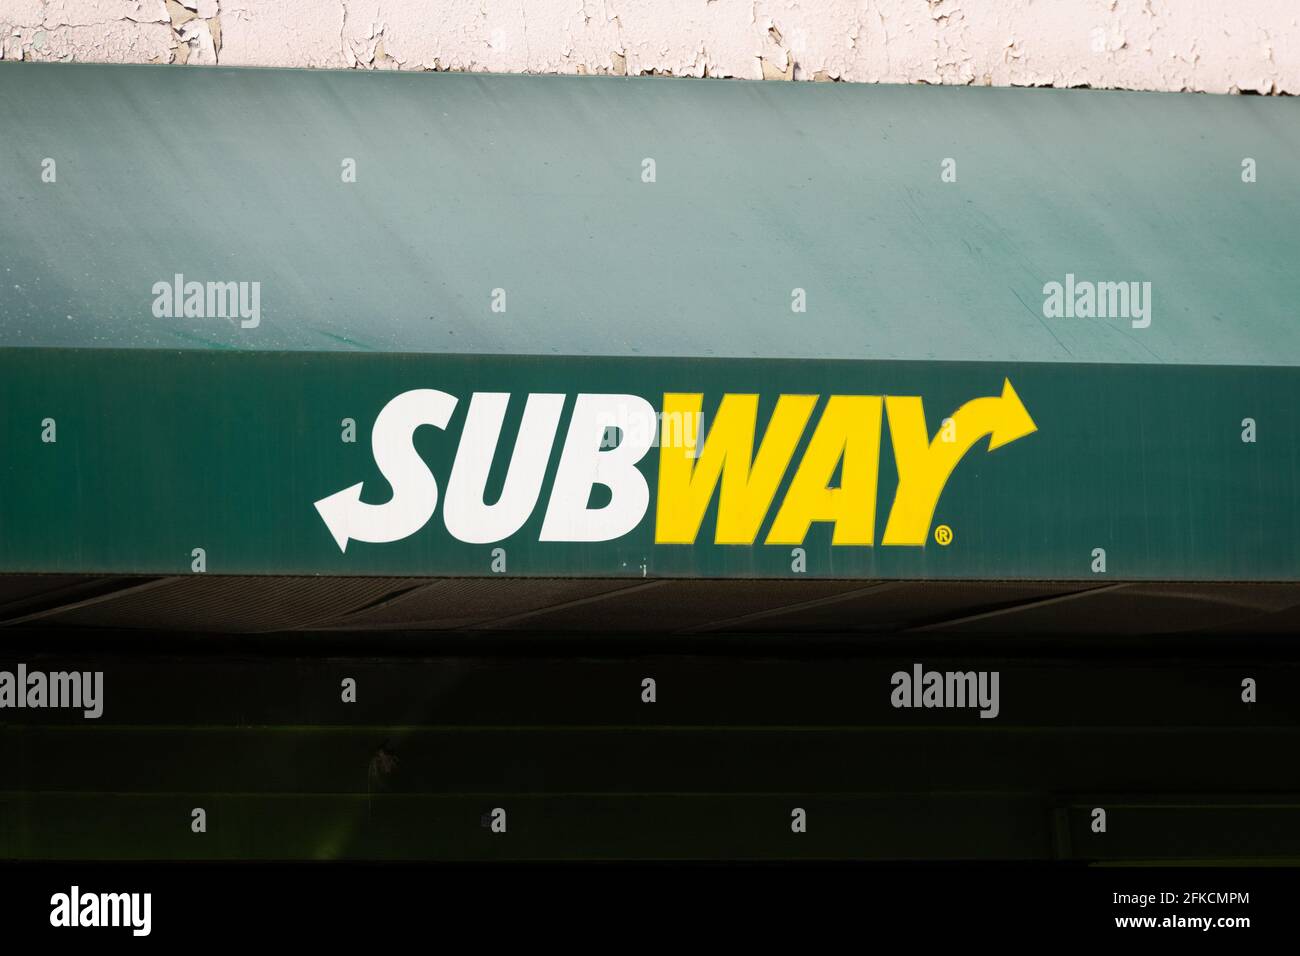 Washington, USA. 30th Apr, 2021. A general view of a Subway logo on a storefront in Washington, DC, on Friday, April 30, 2021, amid the coronavirus pandemic. Earlier this week President Biden gave his first address to Congress, as COVID-19 cases exponentially surge to unseen levels in India and confirmed case counts in America hover above 50,000 daily. (Graeme Sloan/Sipa USA) Credit: Sipa USA/Alamy Live News Stock Photo